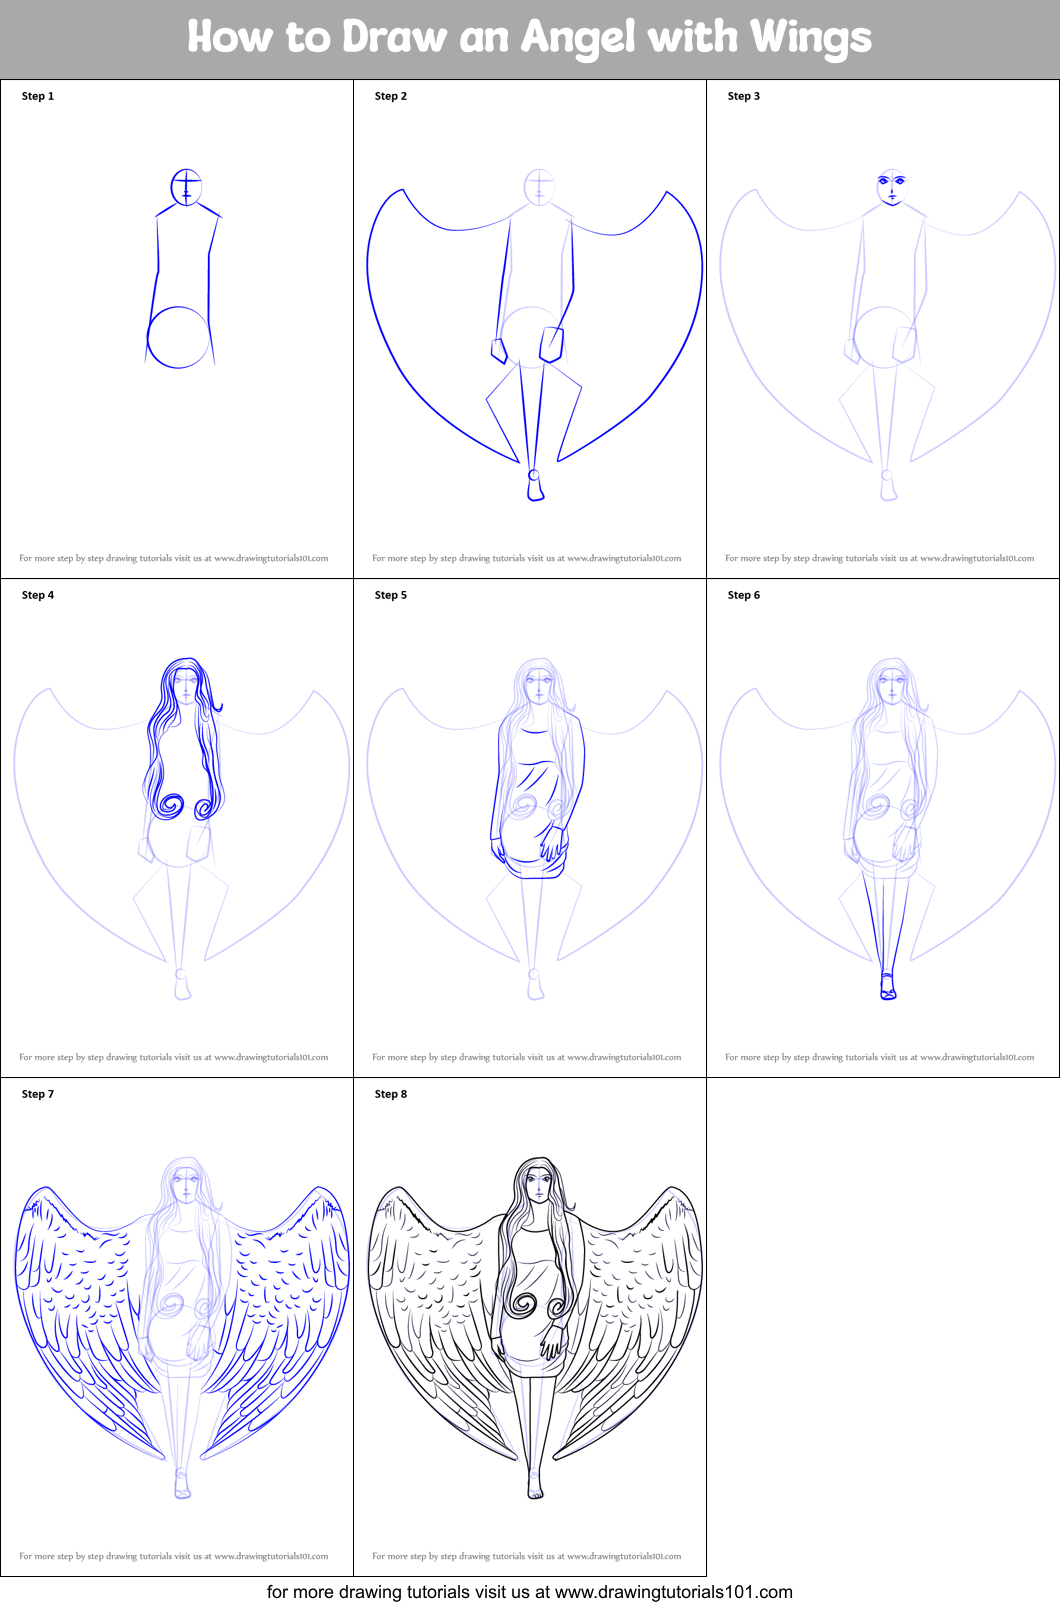 How to Draw an Angel with Wings printable step by step drawing sheet